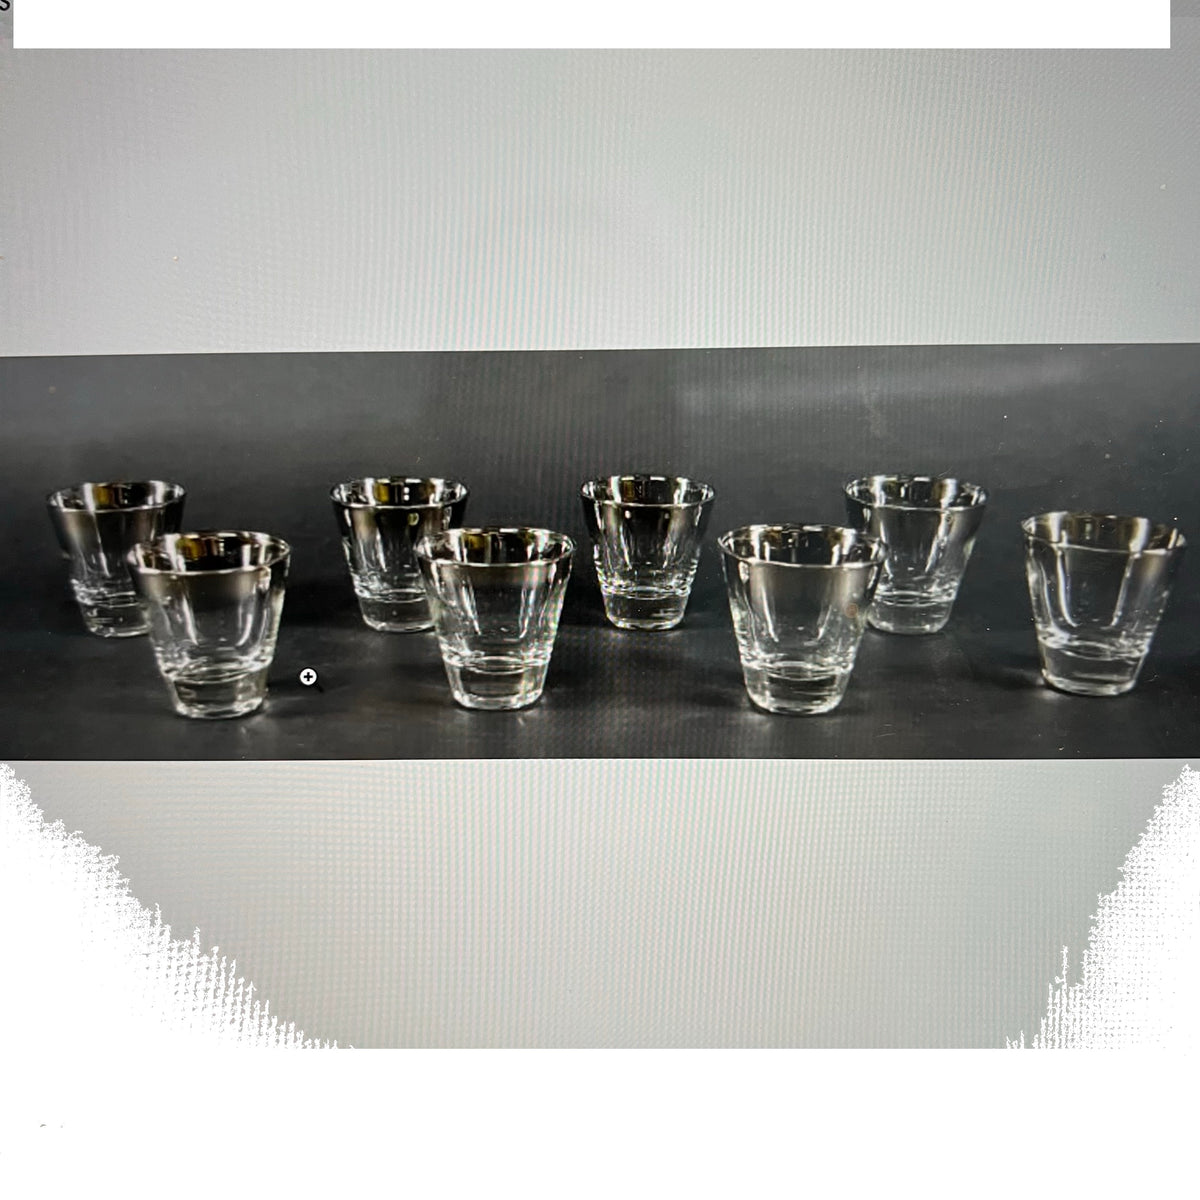 Set of 24 silver "fade rim" Dorothy Thorpe style bar glasses.Set contains: 6 highball glasses' 6 pilsner glasses, 6 rocks glasses,  6 shot glasses,  In excellent condition. This is an excellent, large set of mid-century barware. Would make a great unique wedding gift.  Chicago area.  Pick-up available.